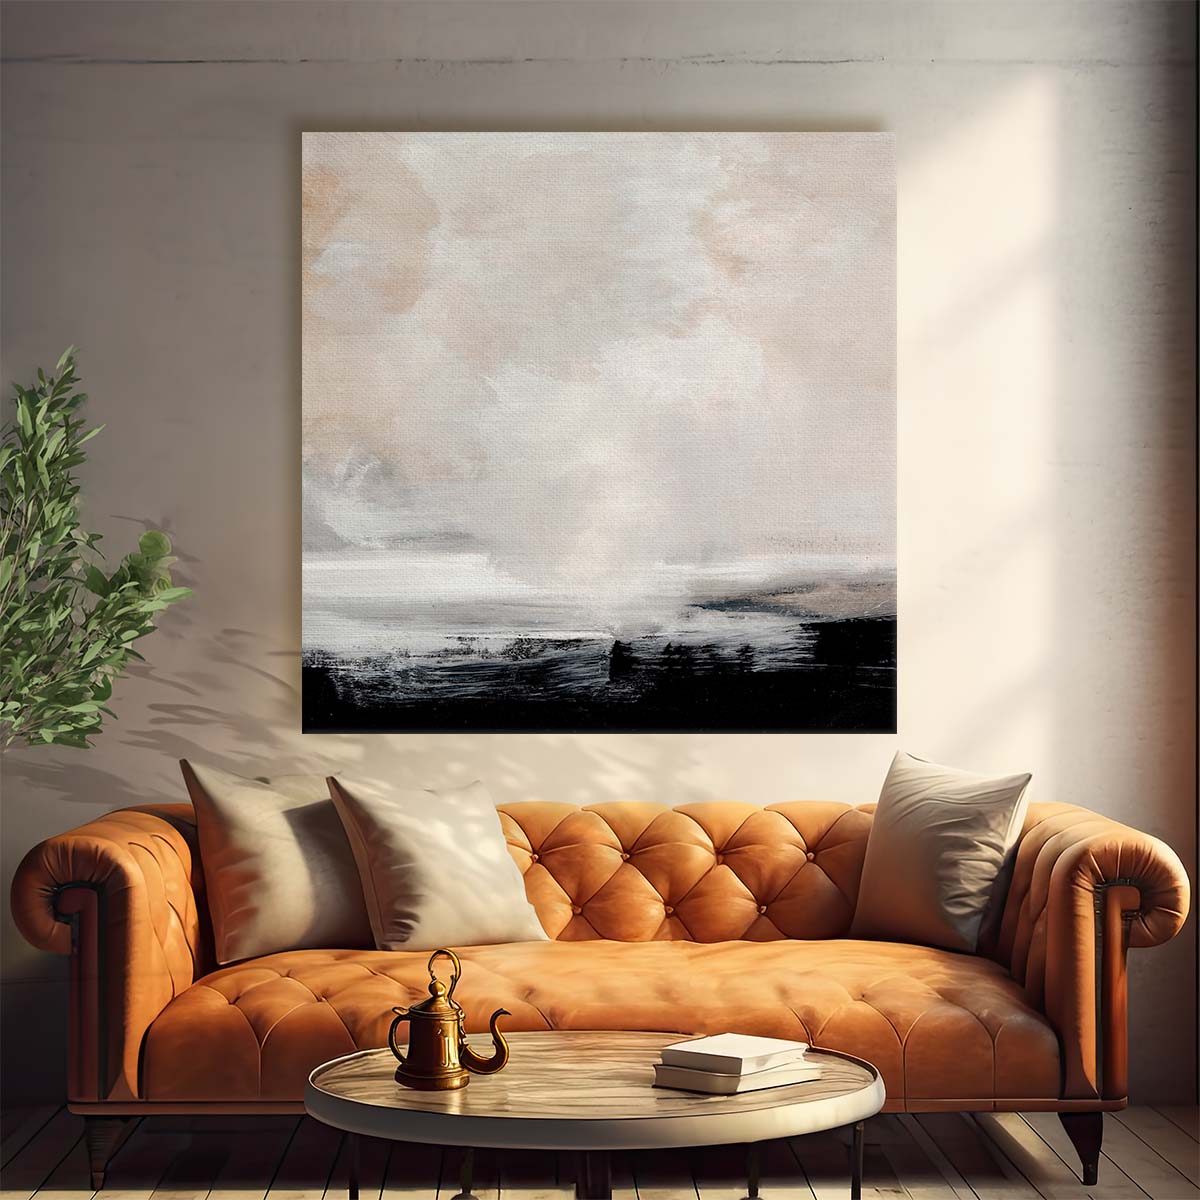 Contemporary Sky & Clouds Abstract Illustration Modern Minimalist Wall Art by Luxuriance Designs. Made in USA.